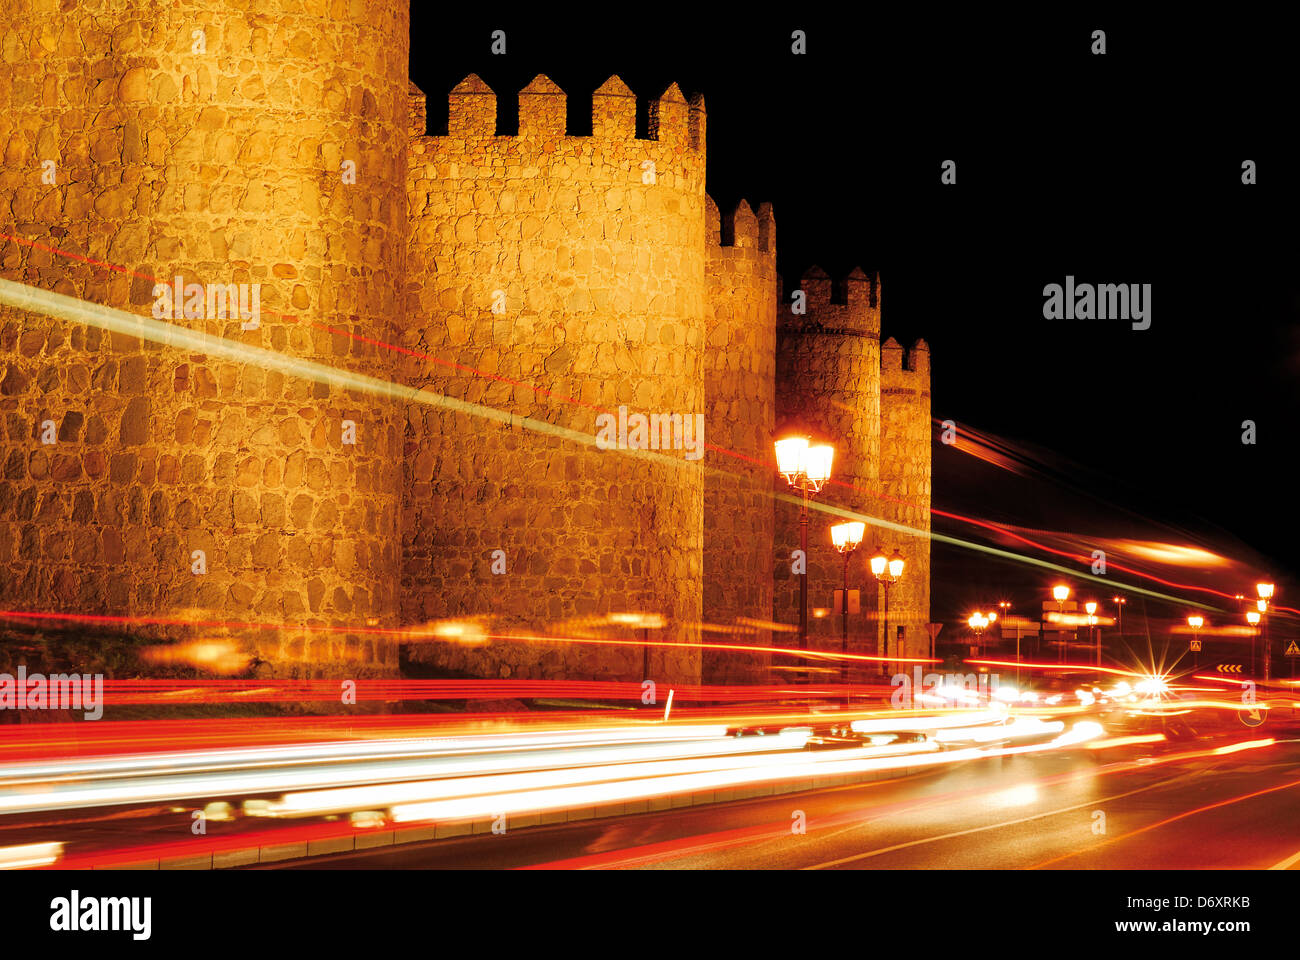 Spain, Castilla-Leon: Evening traffic in front of the medieval town wall of  World Heritage town Ávila Stock Photo